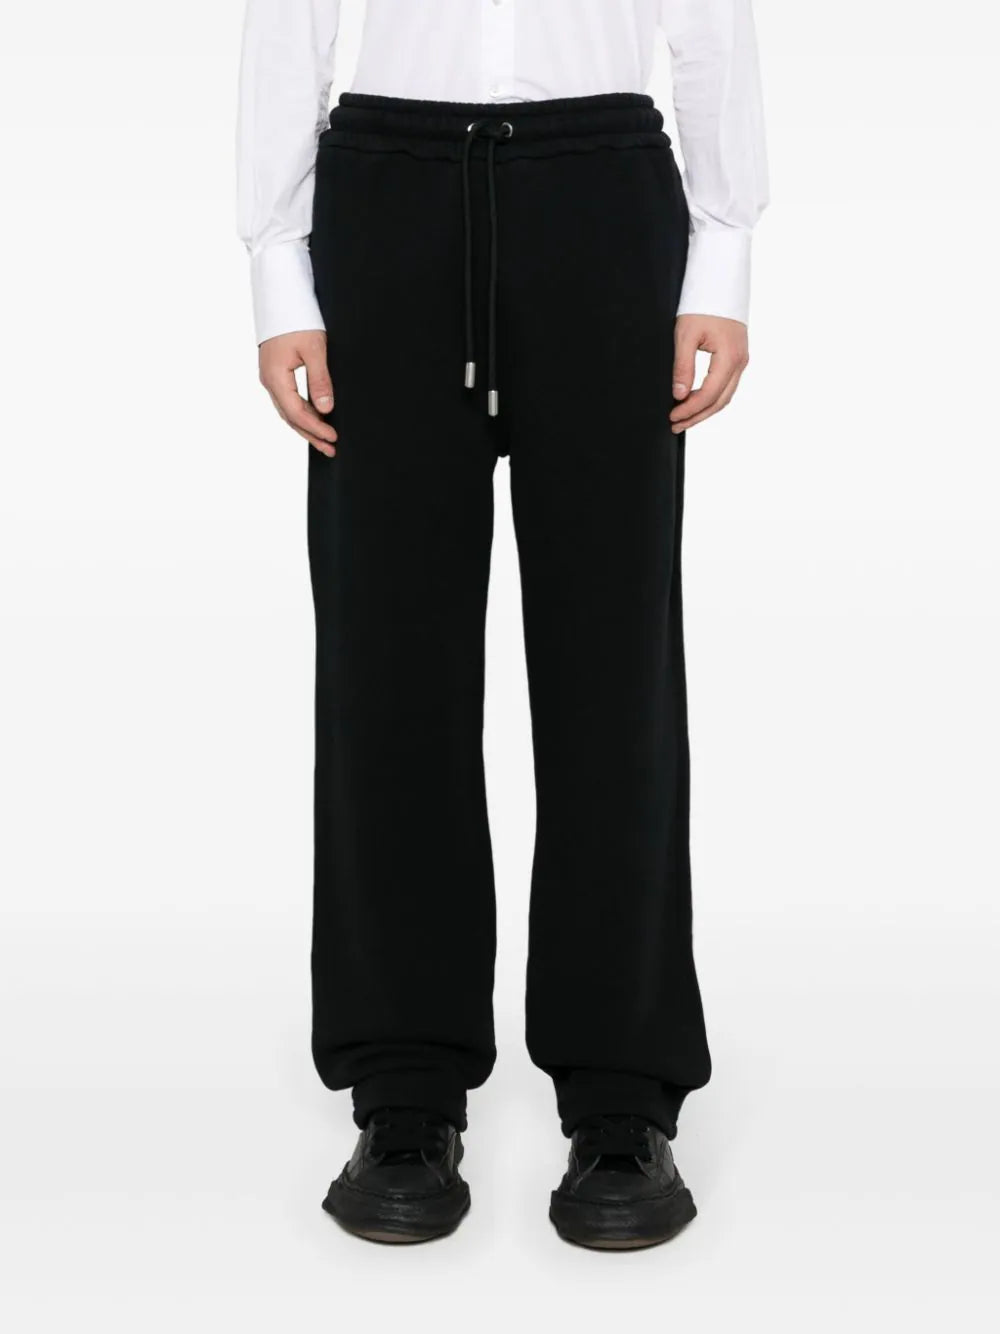 Scribble-Diag-stripes jersey trousers